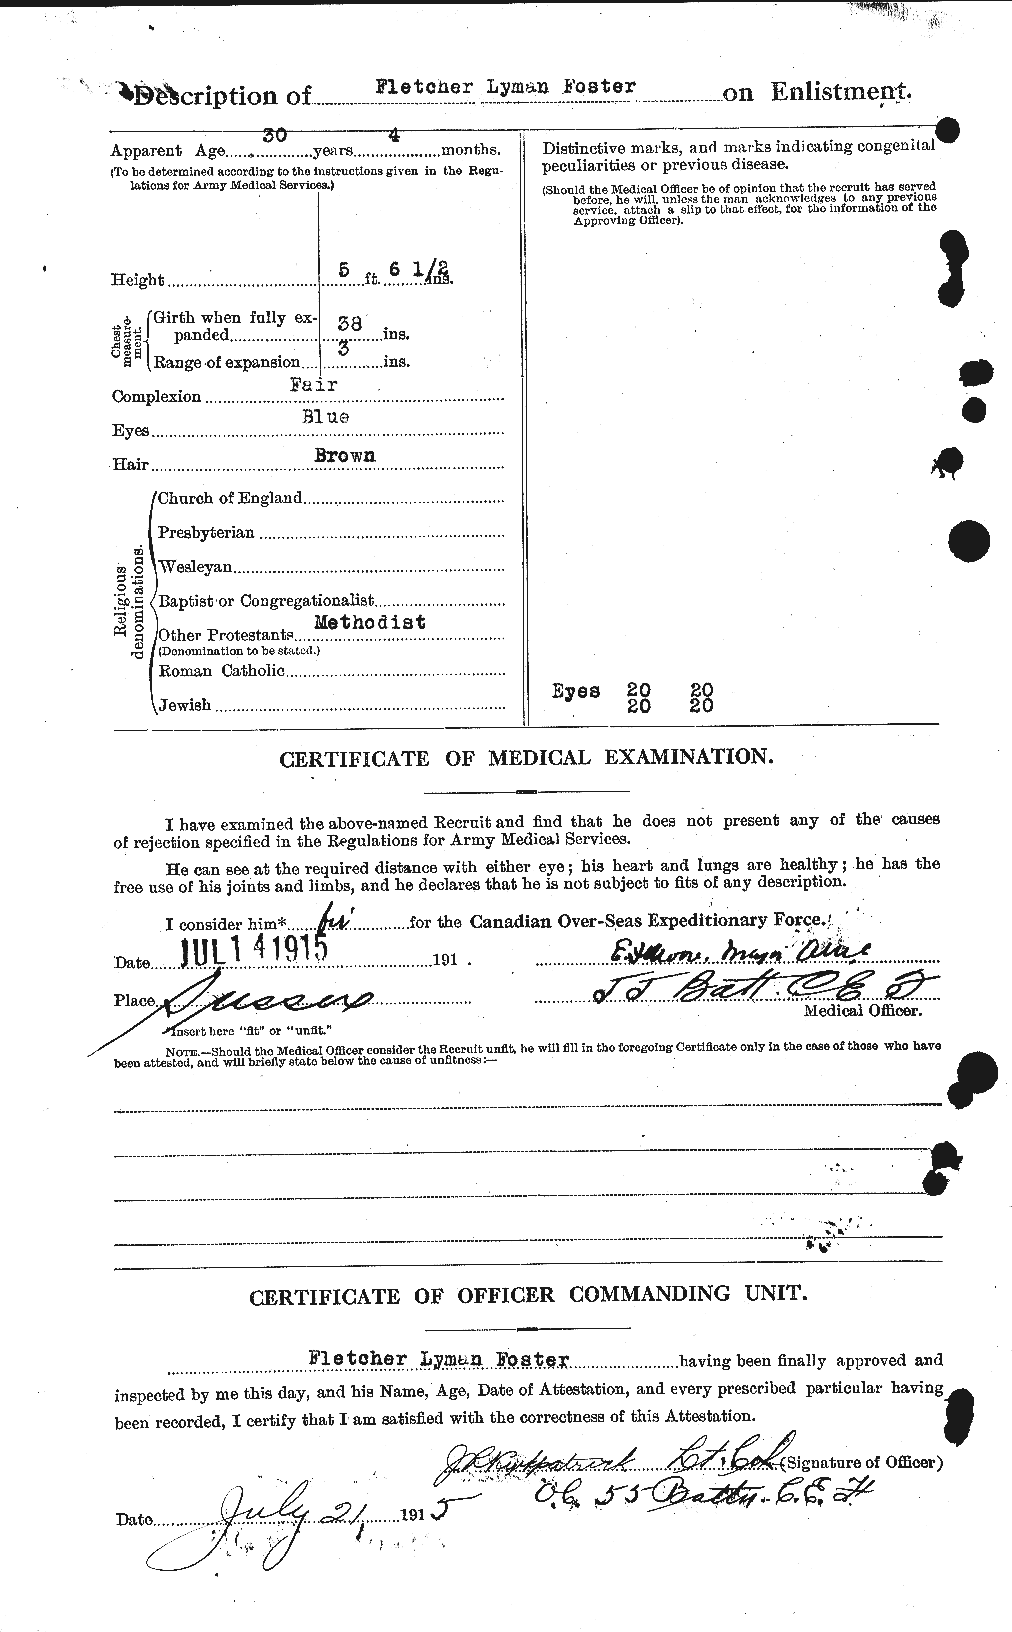 Personnel Records of the First World War - CEF 330610b